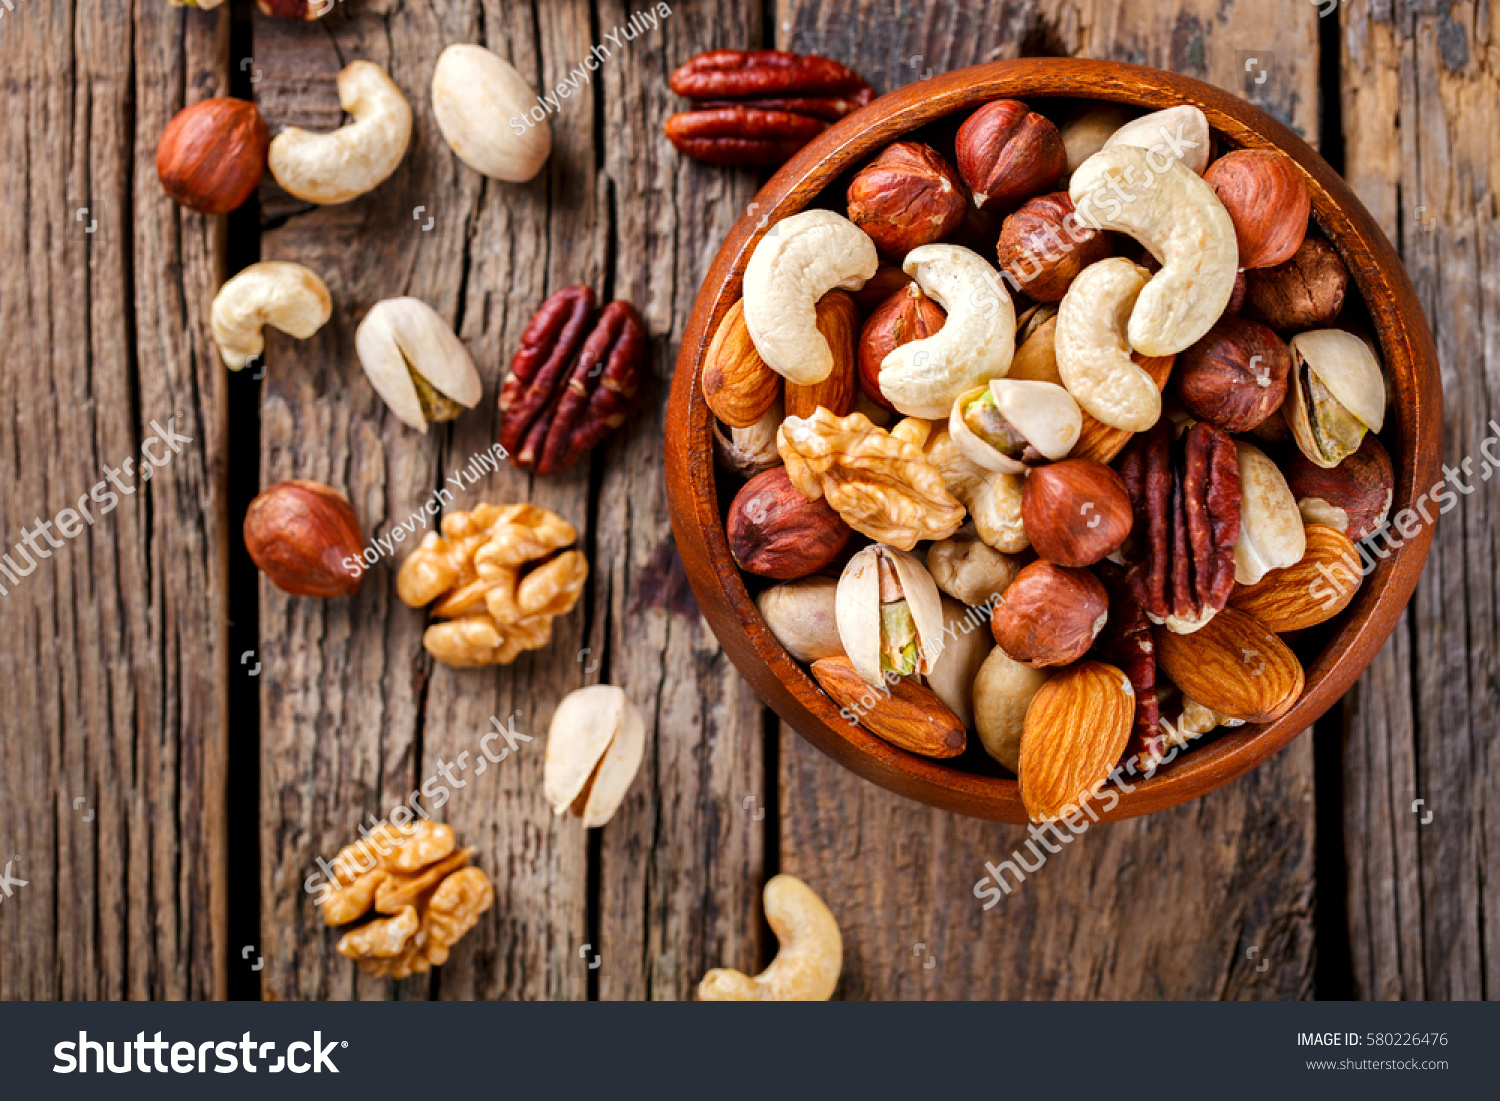 Nuts Mixed in a wooden plate.Assortment, Walnuts,Pecan,Almonds,Hazelnuts,Cashews,Pistachios.Concept of Healthy Eating.Vegetarian.selective focus. #580226476